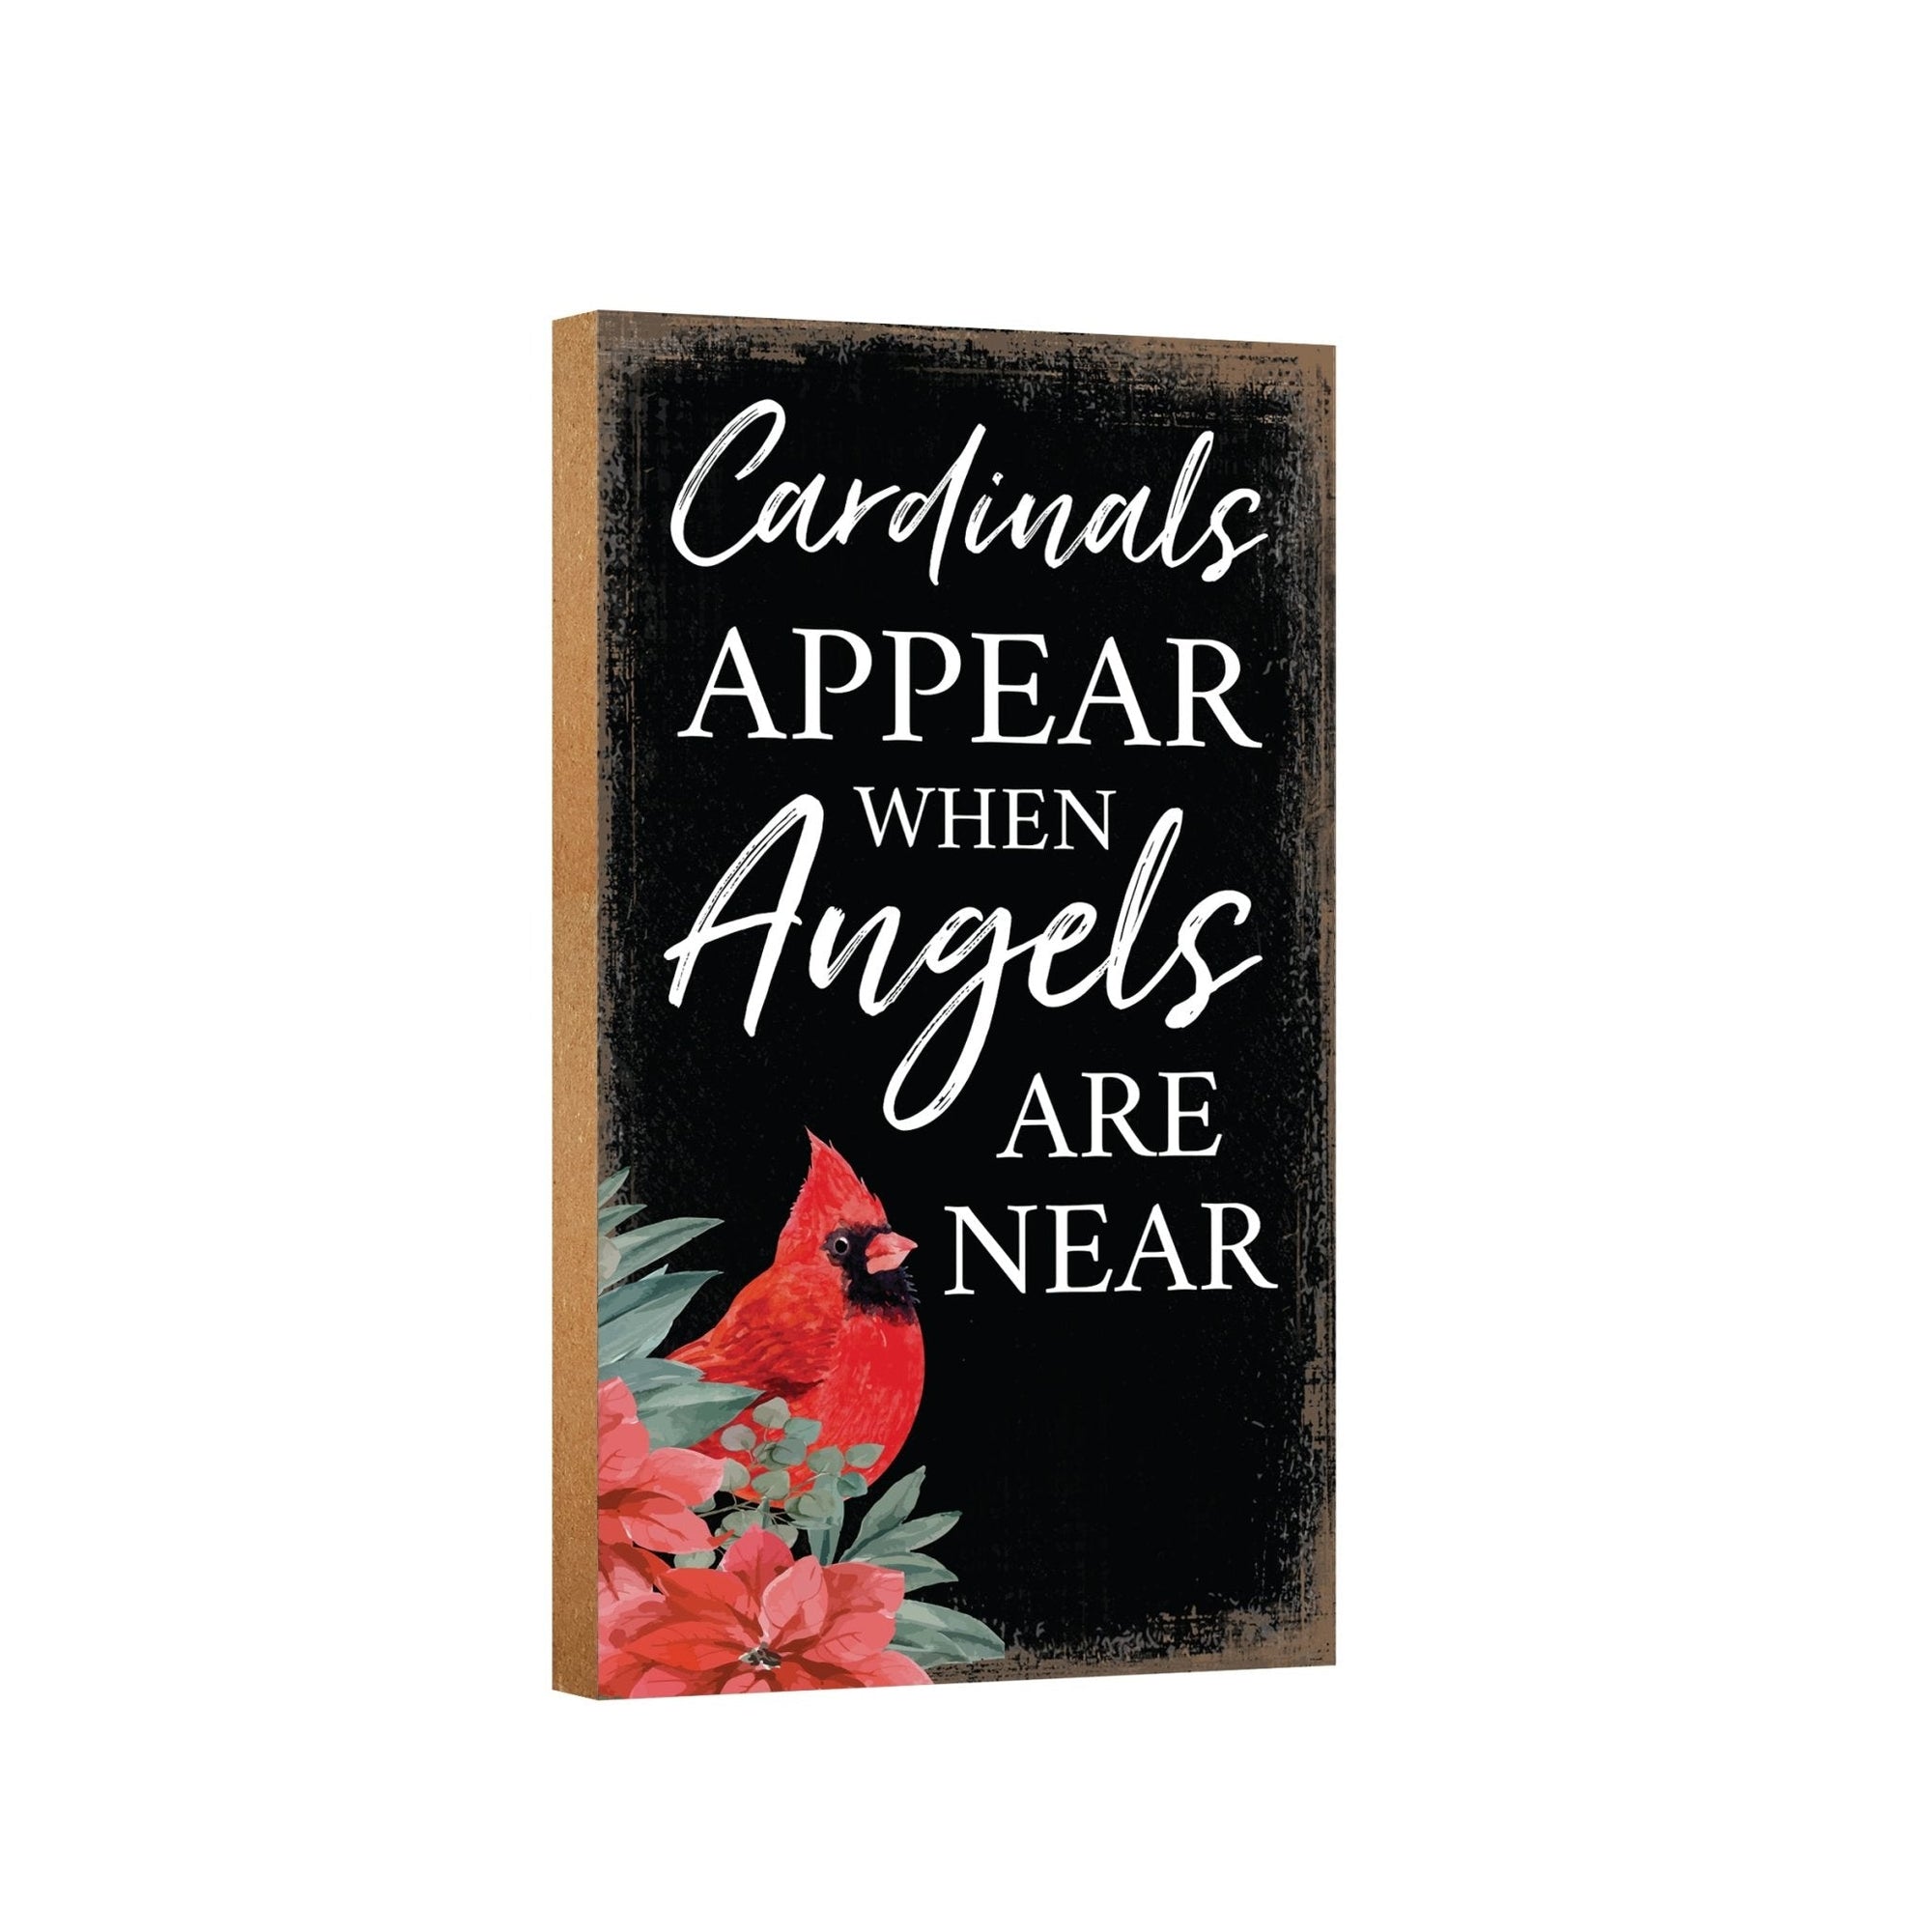 Memorial gifts for the loss of a loved one: A meaningful wooden plaque with a cardinal motif.